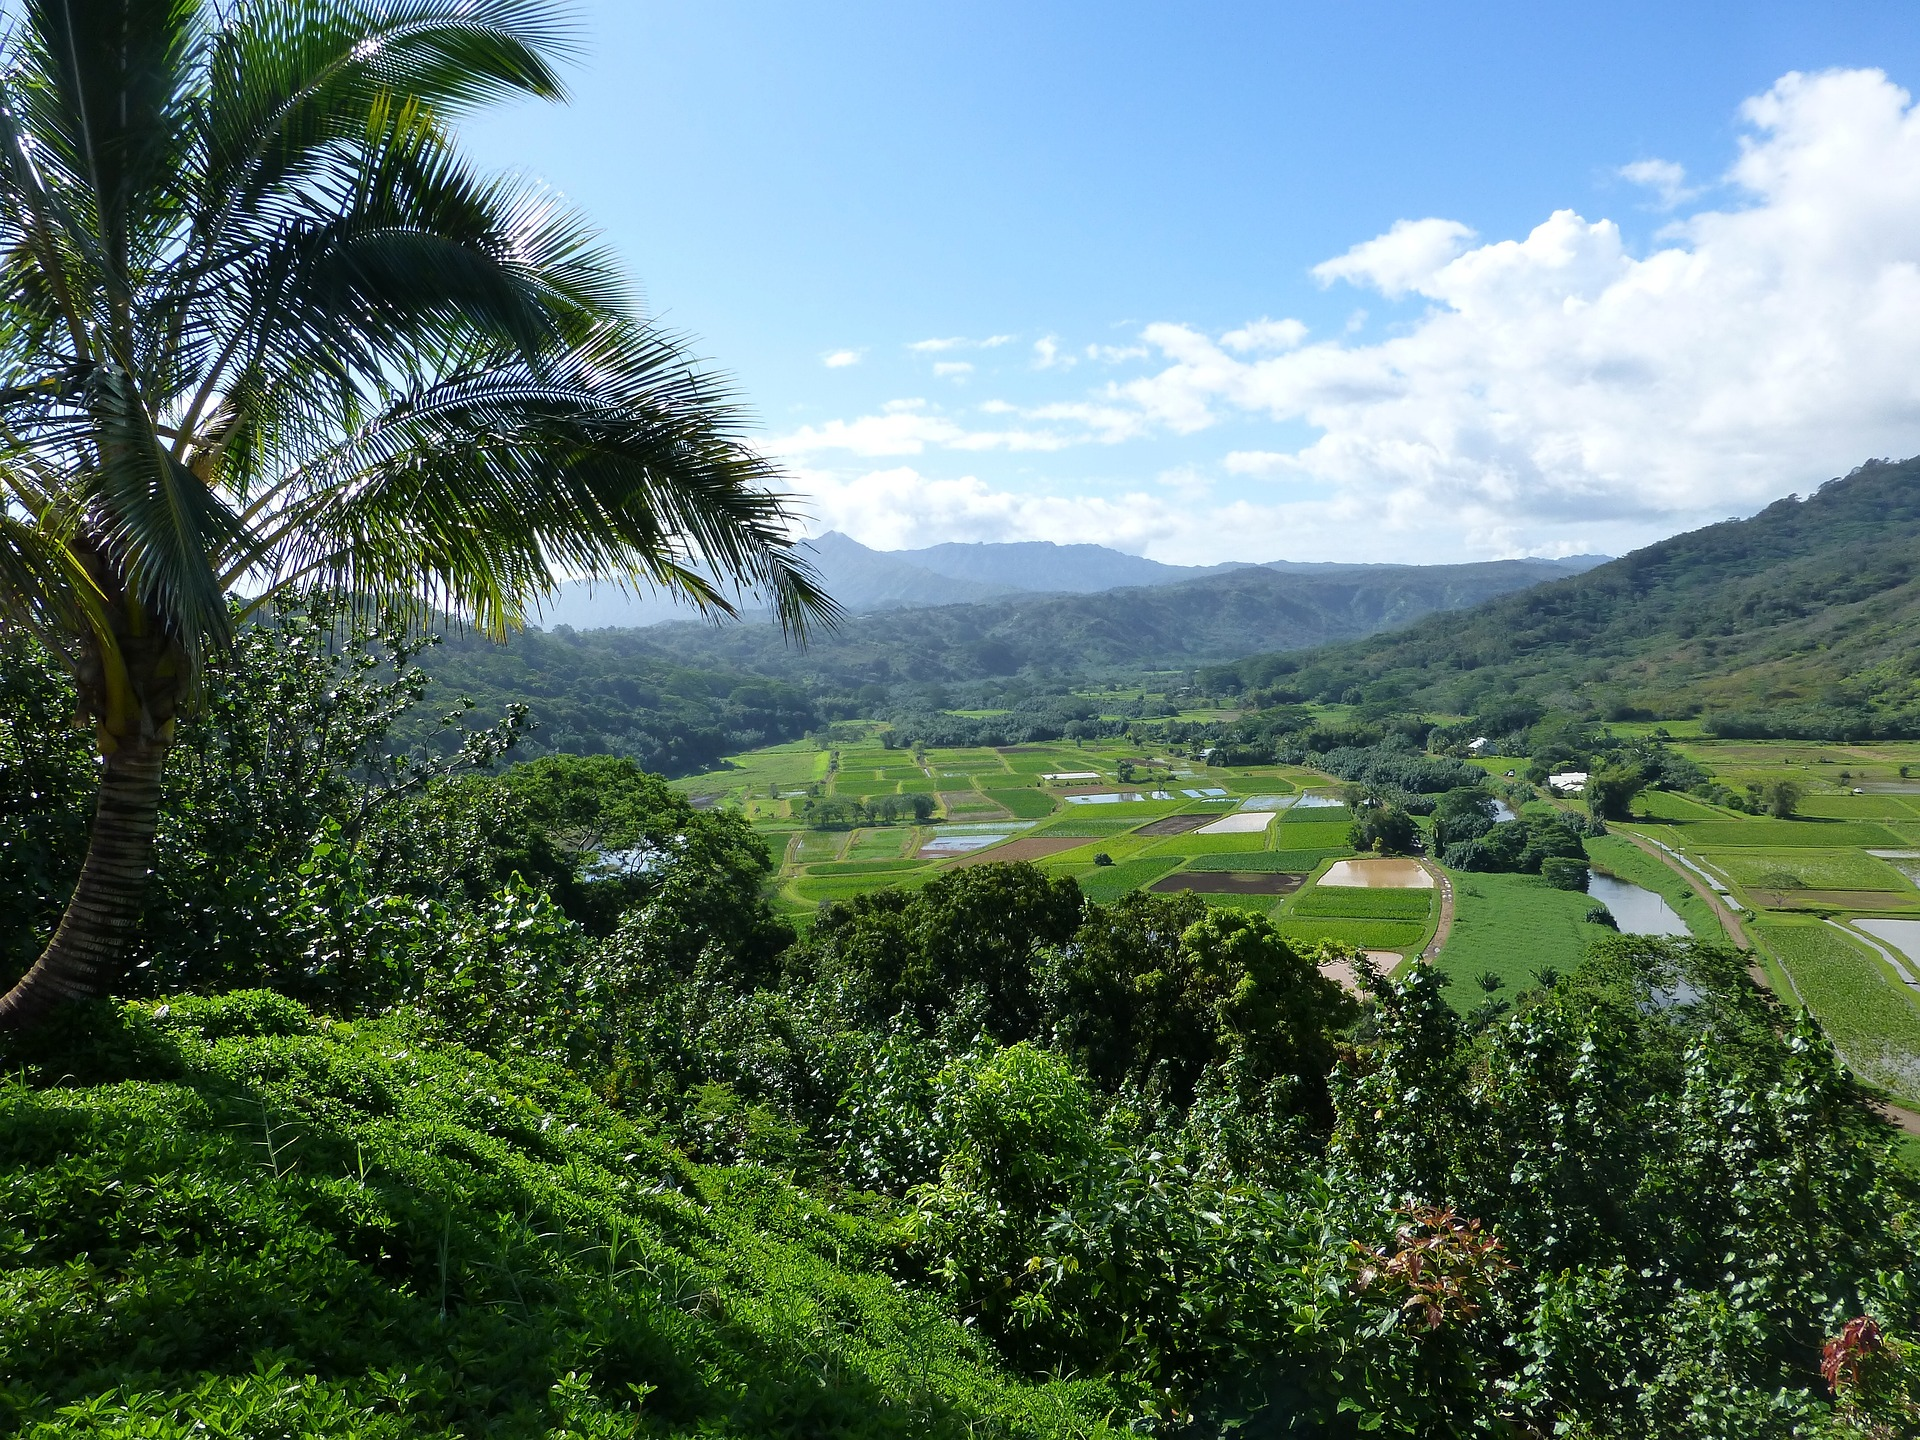 A scenic of Hanalei Valley Lookout in Kauai. A view of a lot of greenery and small houses in the middle.